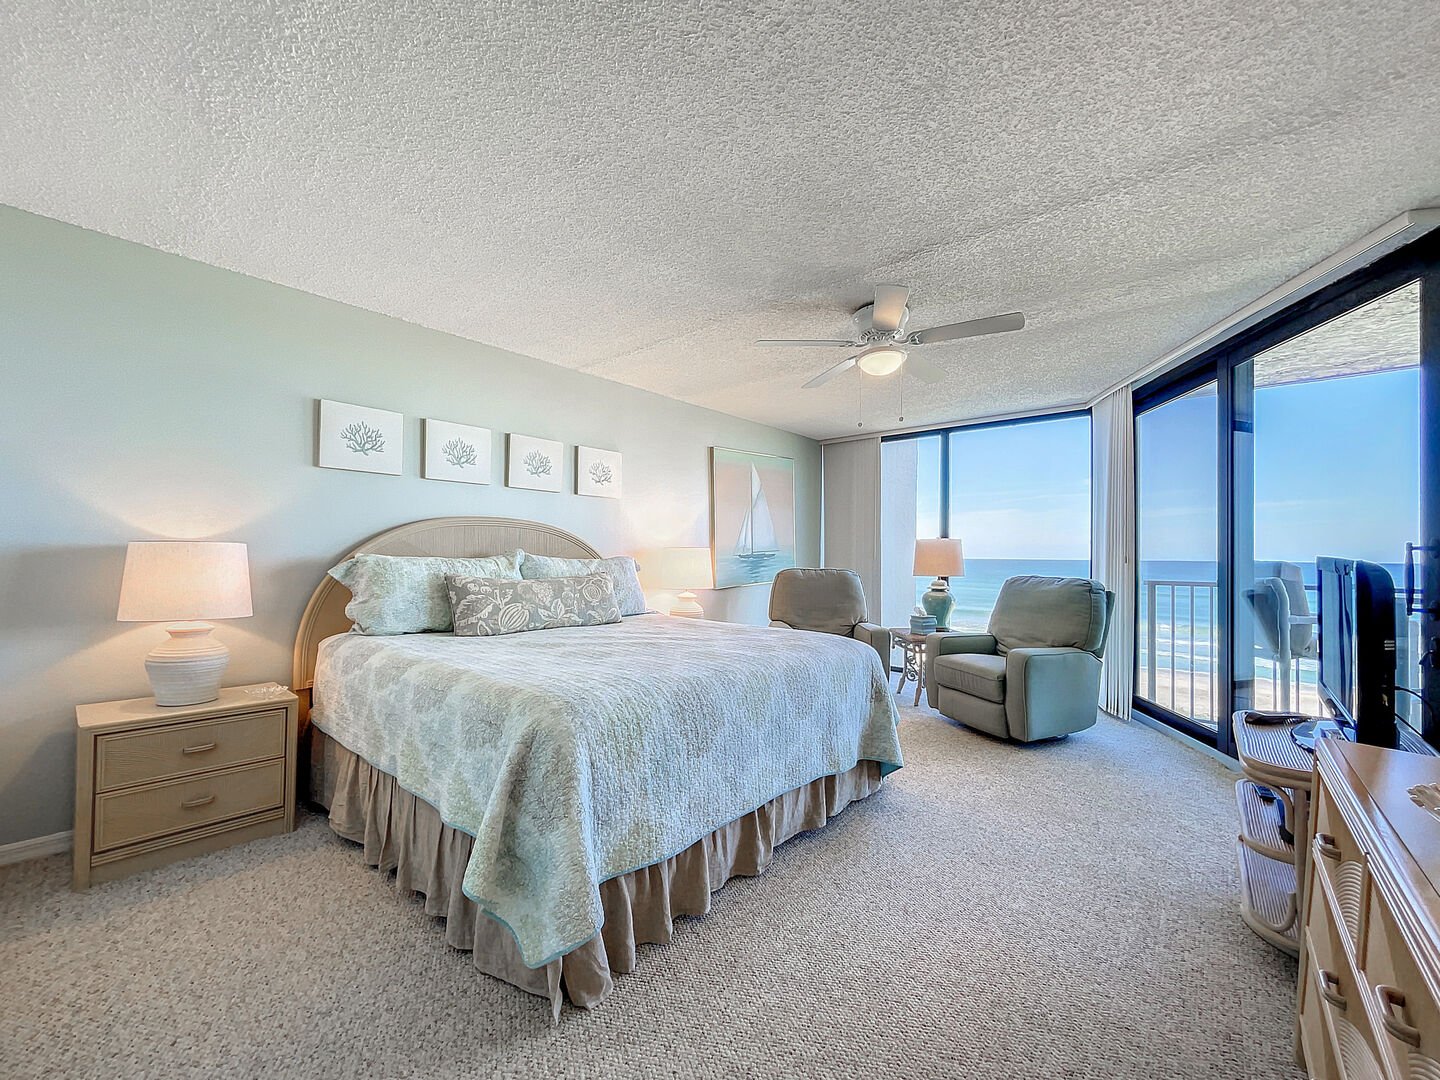 Wake up and see the dolphins play in the oceanfront master bedroom with floor-to-ceiling windows, king sized bed, flat screen TV, DVD and private master bath.